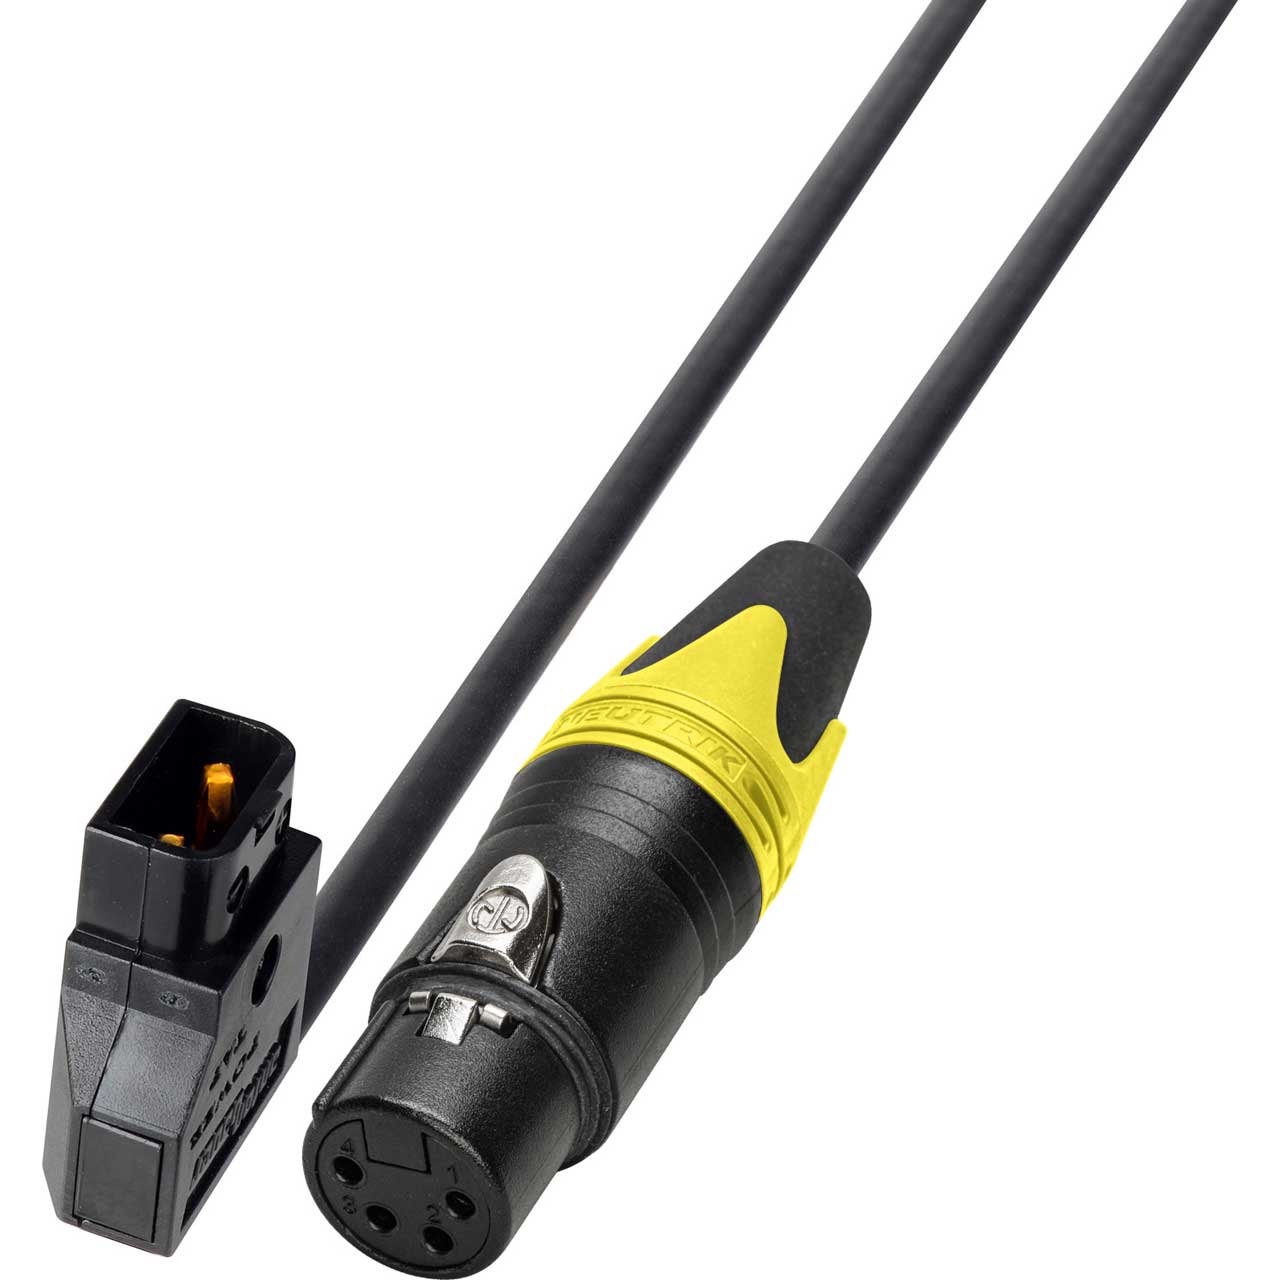 Laird AB-PWR3-01 PowerTap Male to 4-Pin XLR Female DC Power Cable D-Tap - 1 Foot